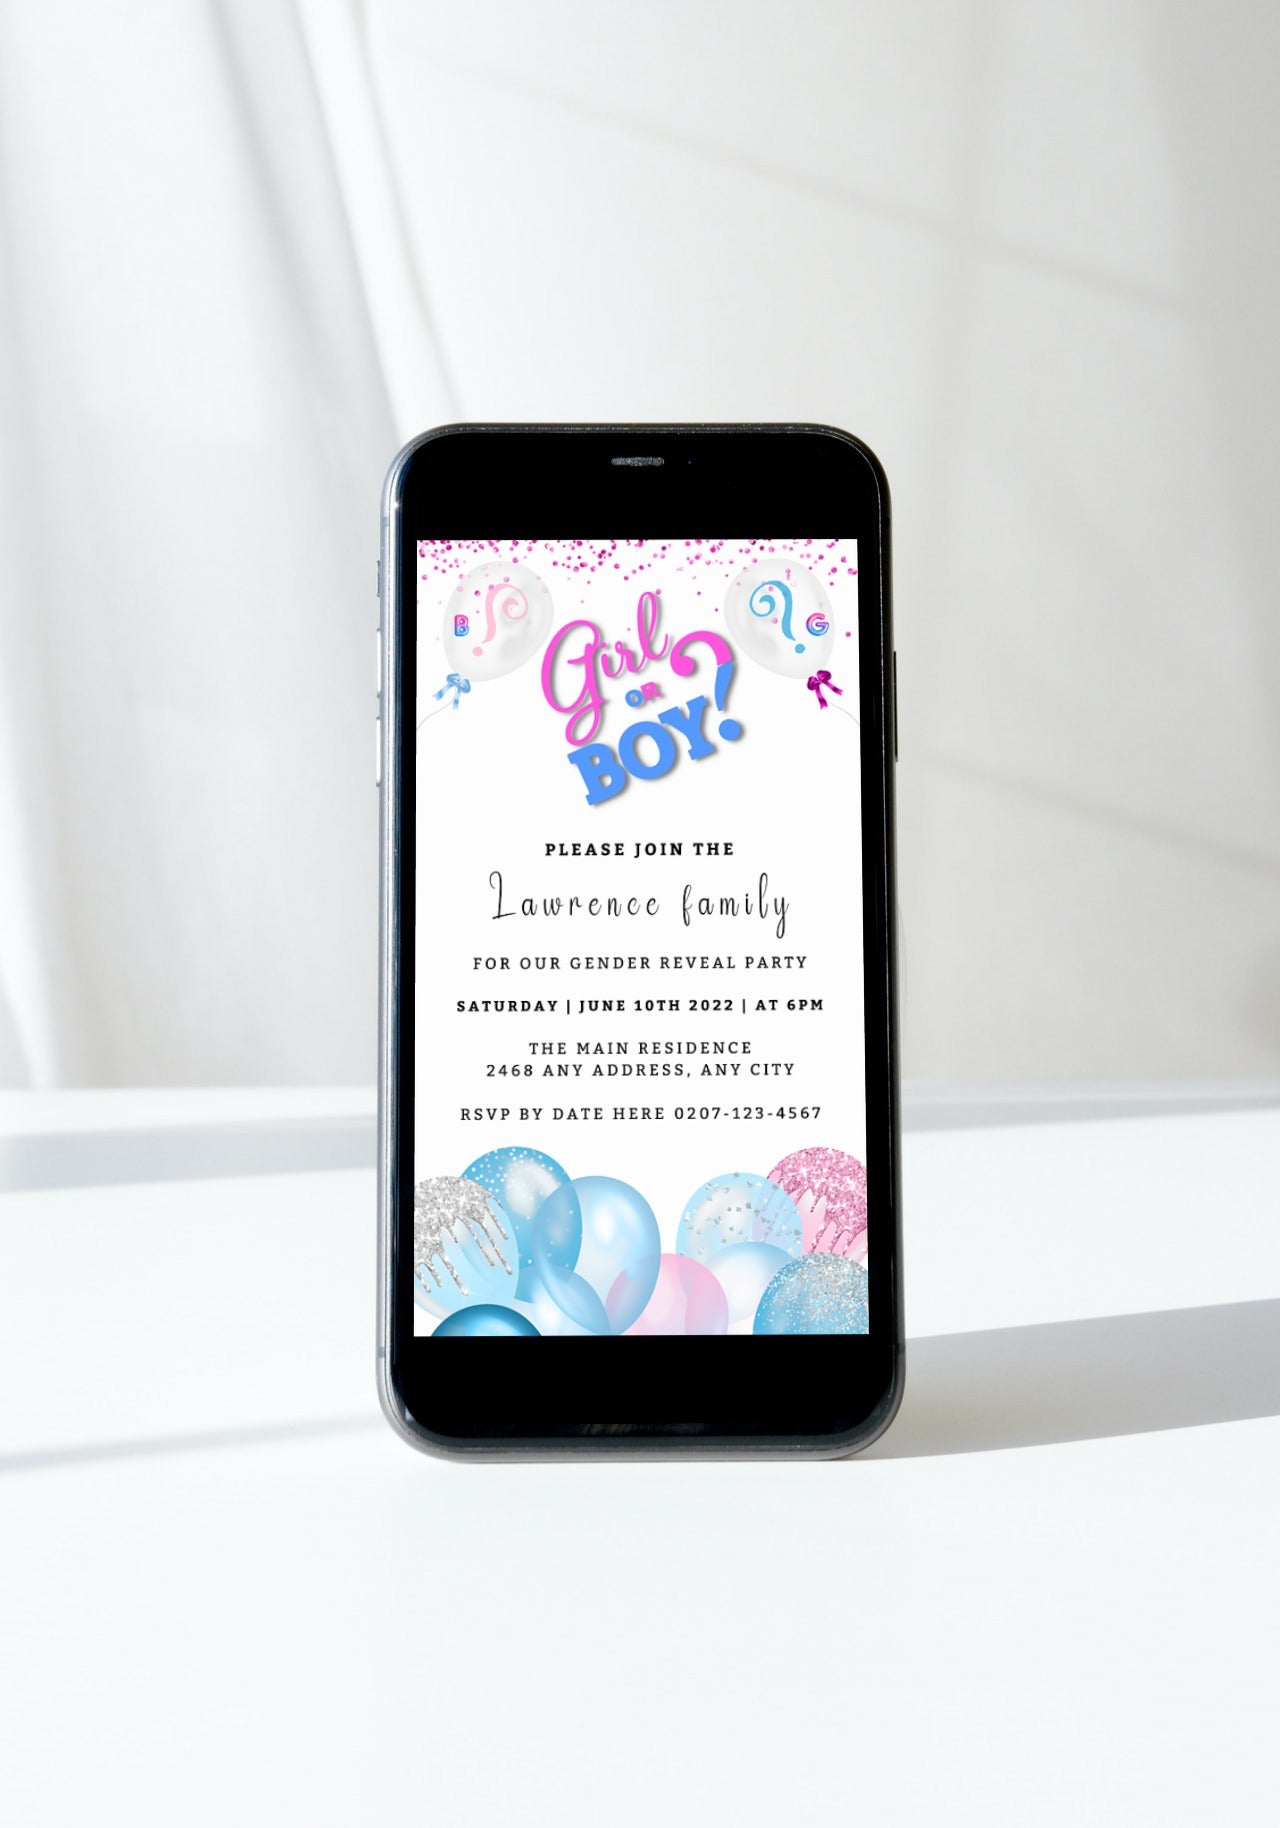 Smartphone displaying a customizable digital invitation for a gender reveal party, featuring blue and pink balloons and editable text options.